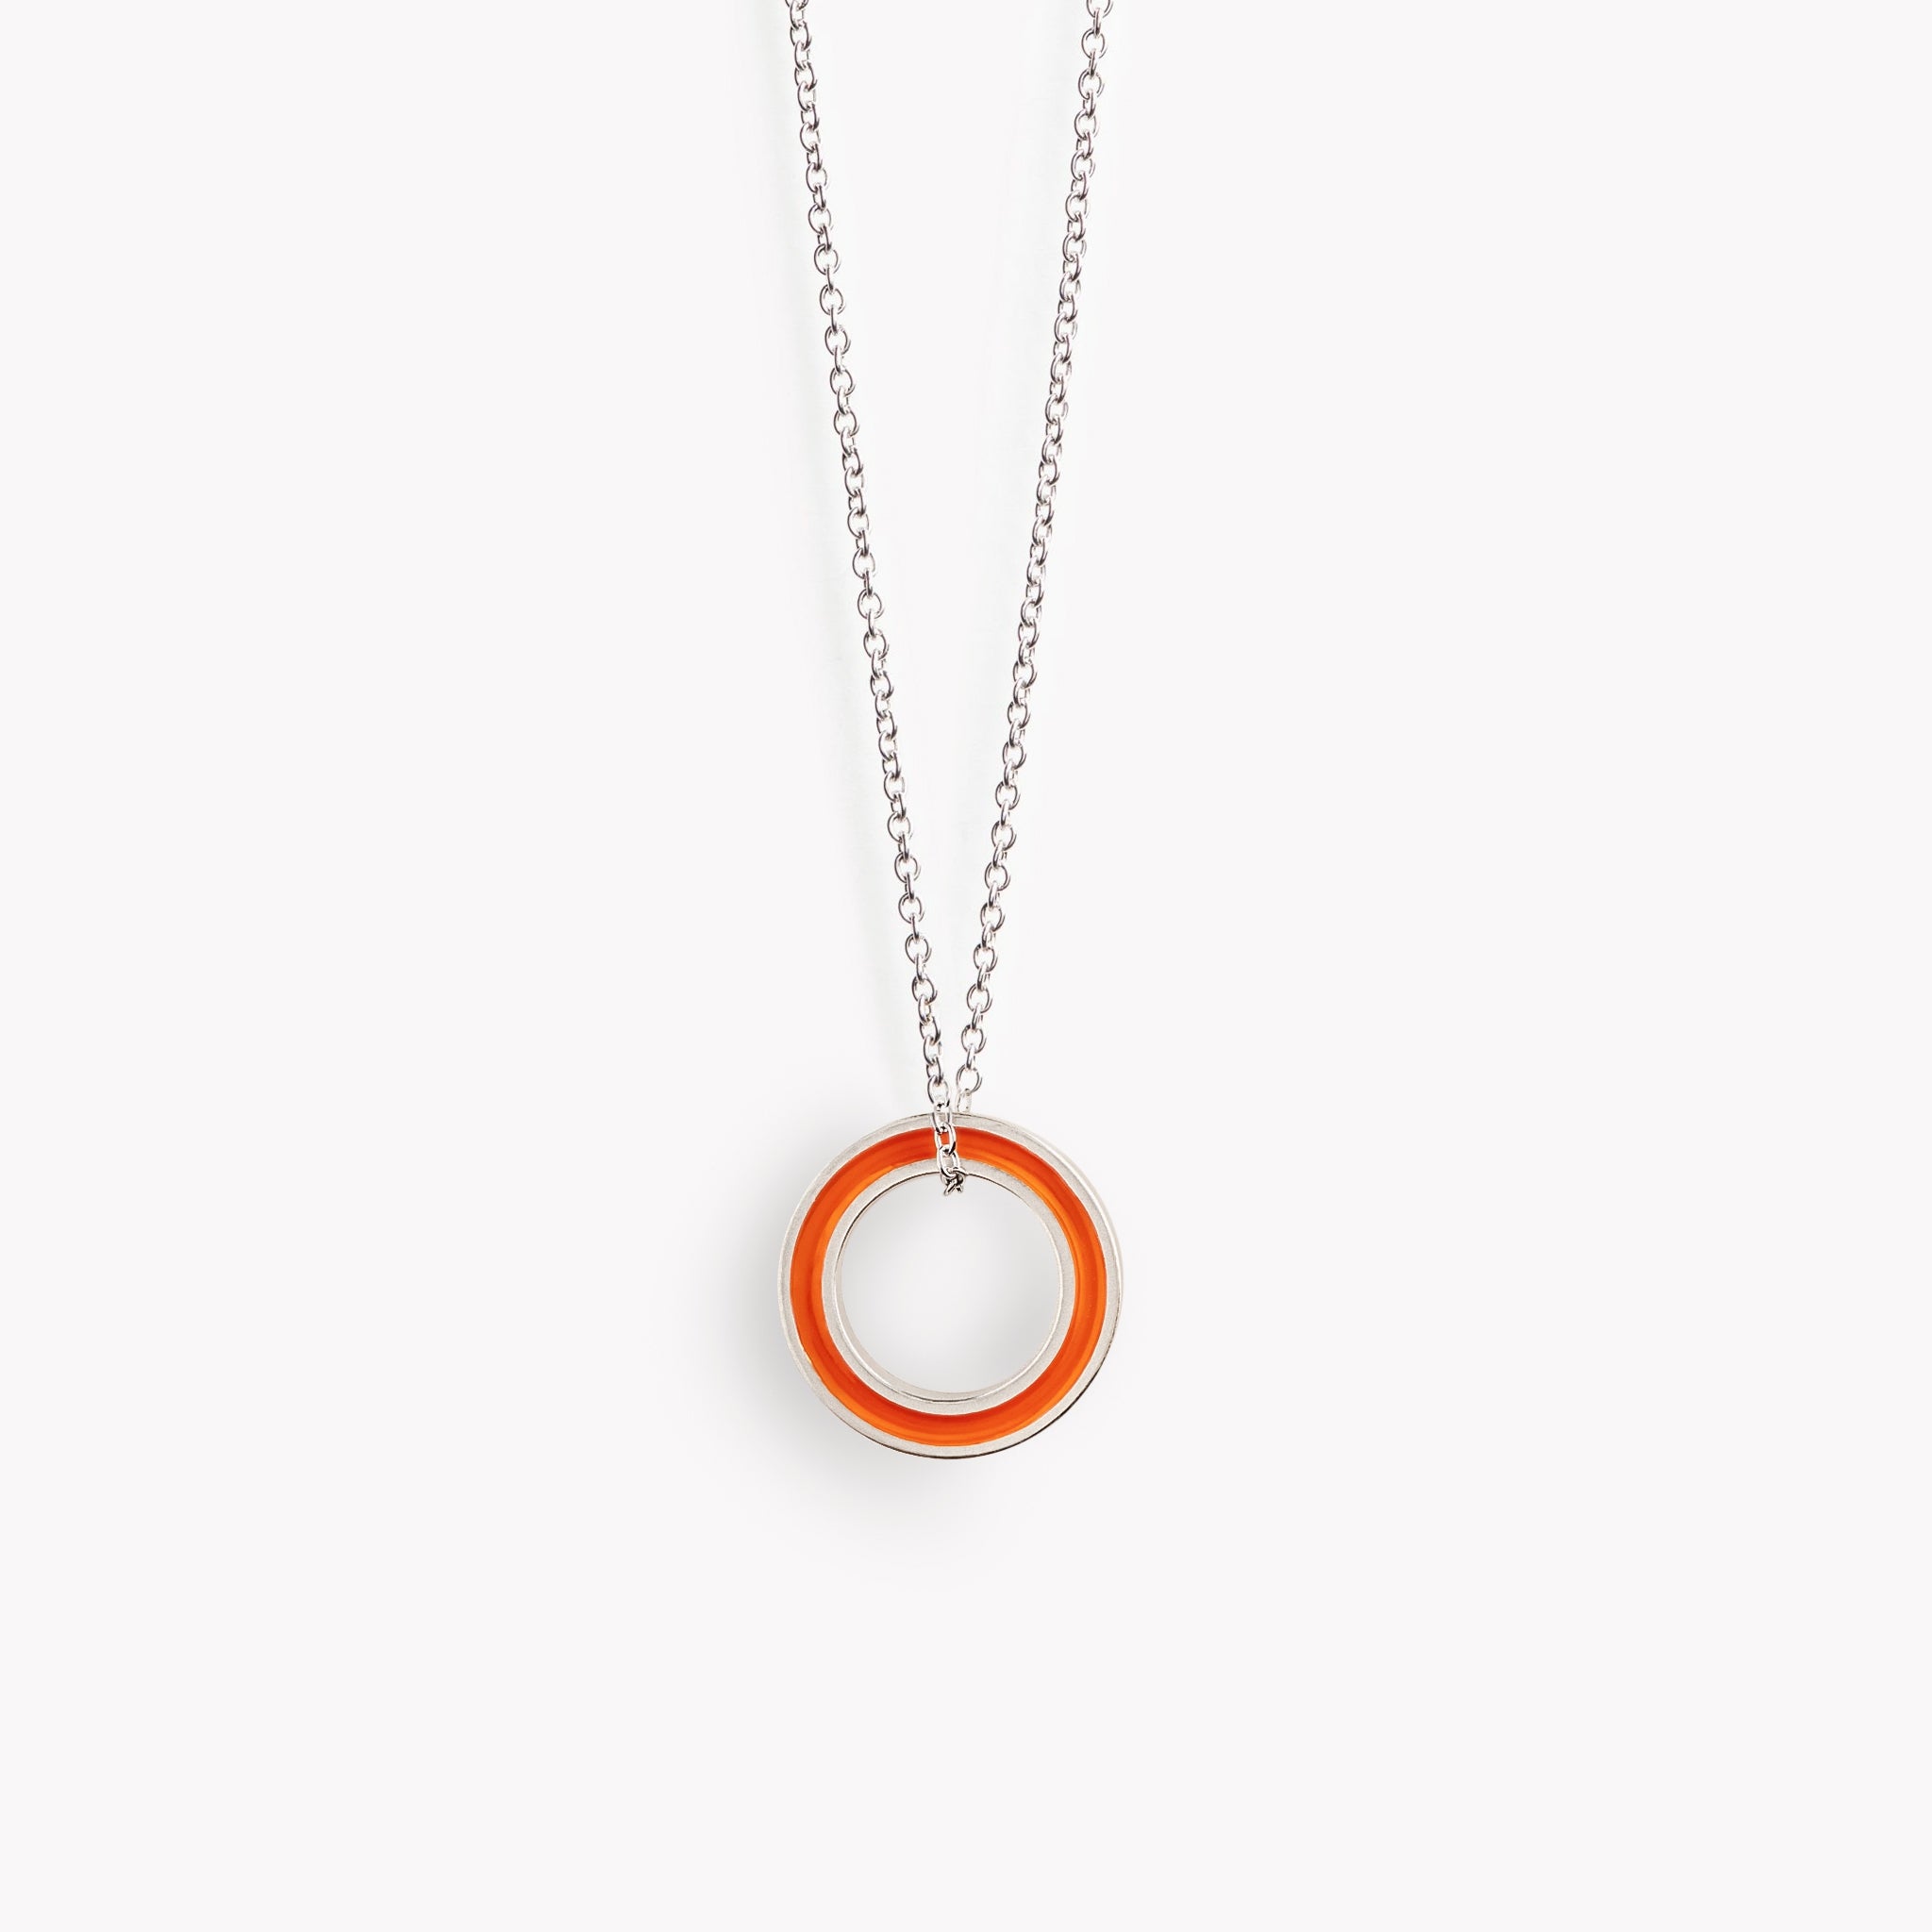 A simple orange circular necklace on a fine steel trace chain.